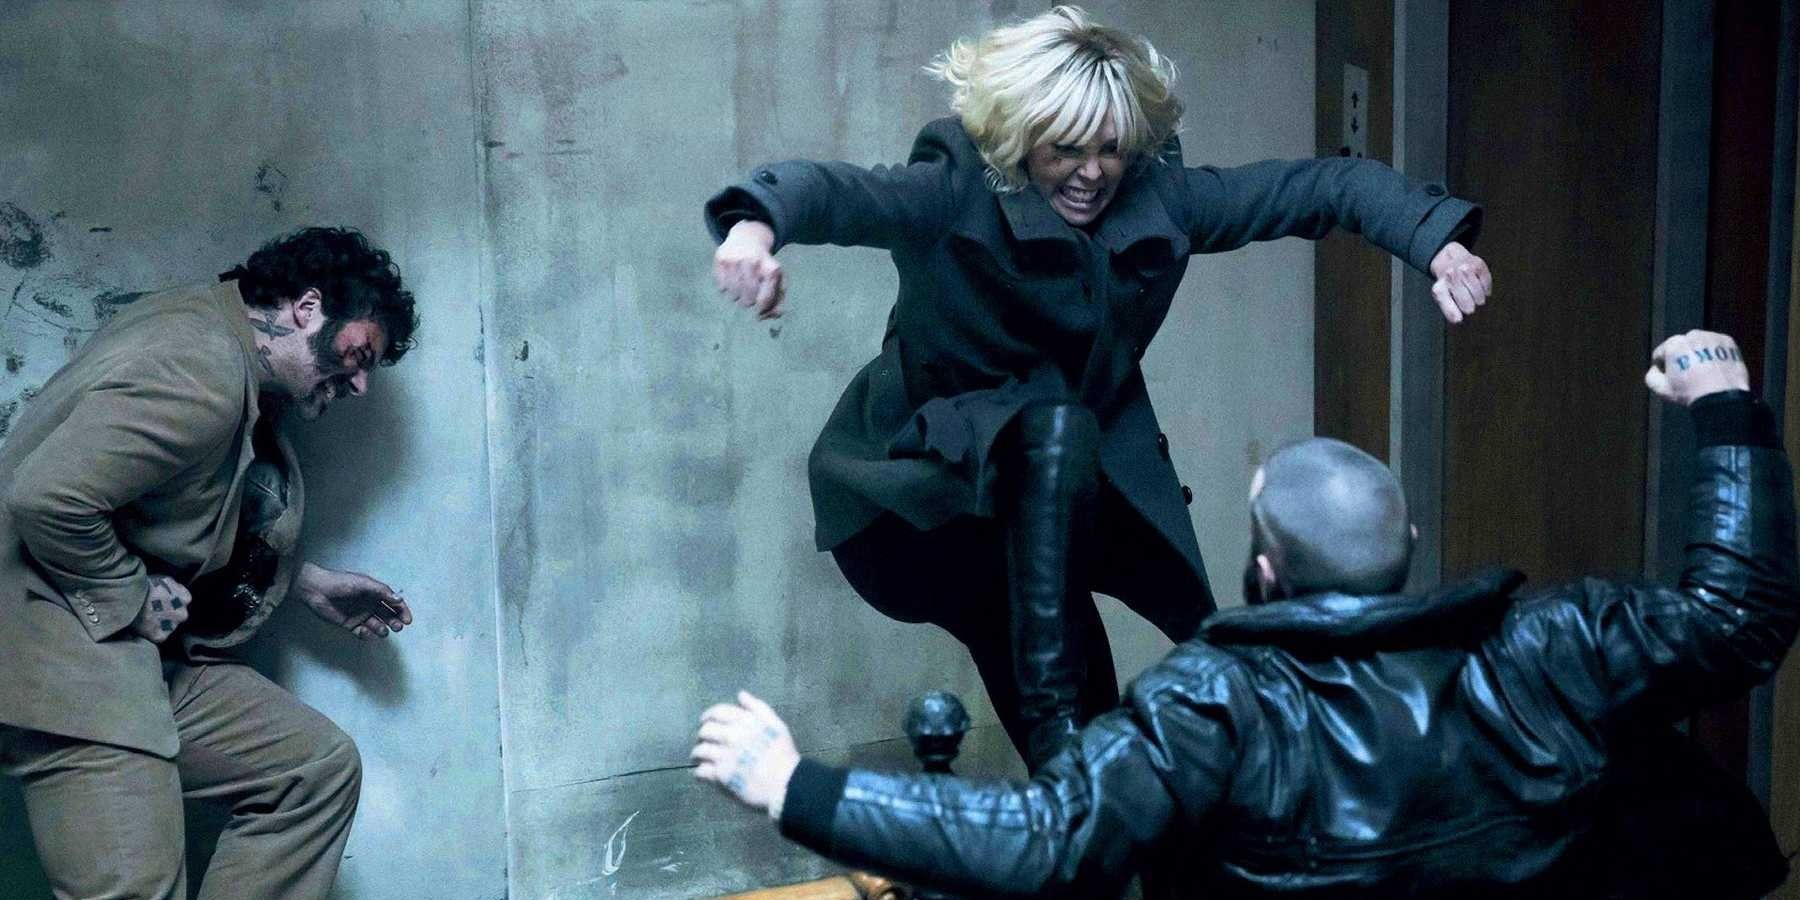 Lorraine fights two Russian mobsters on a stairwell in Atomic Blonde